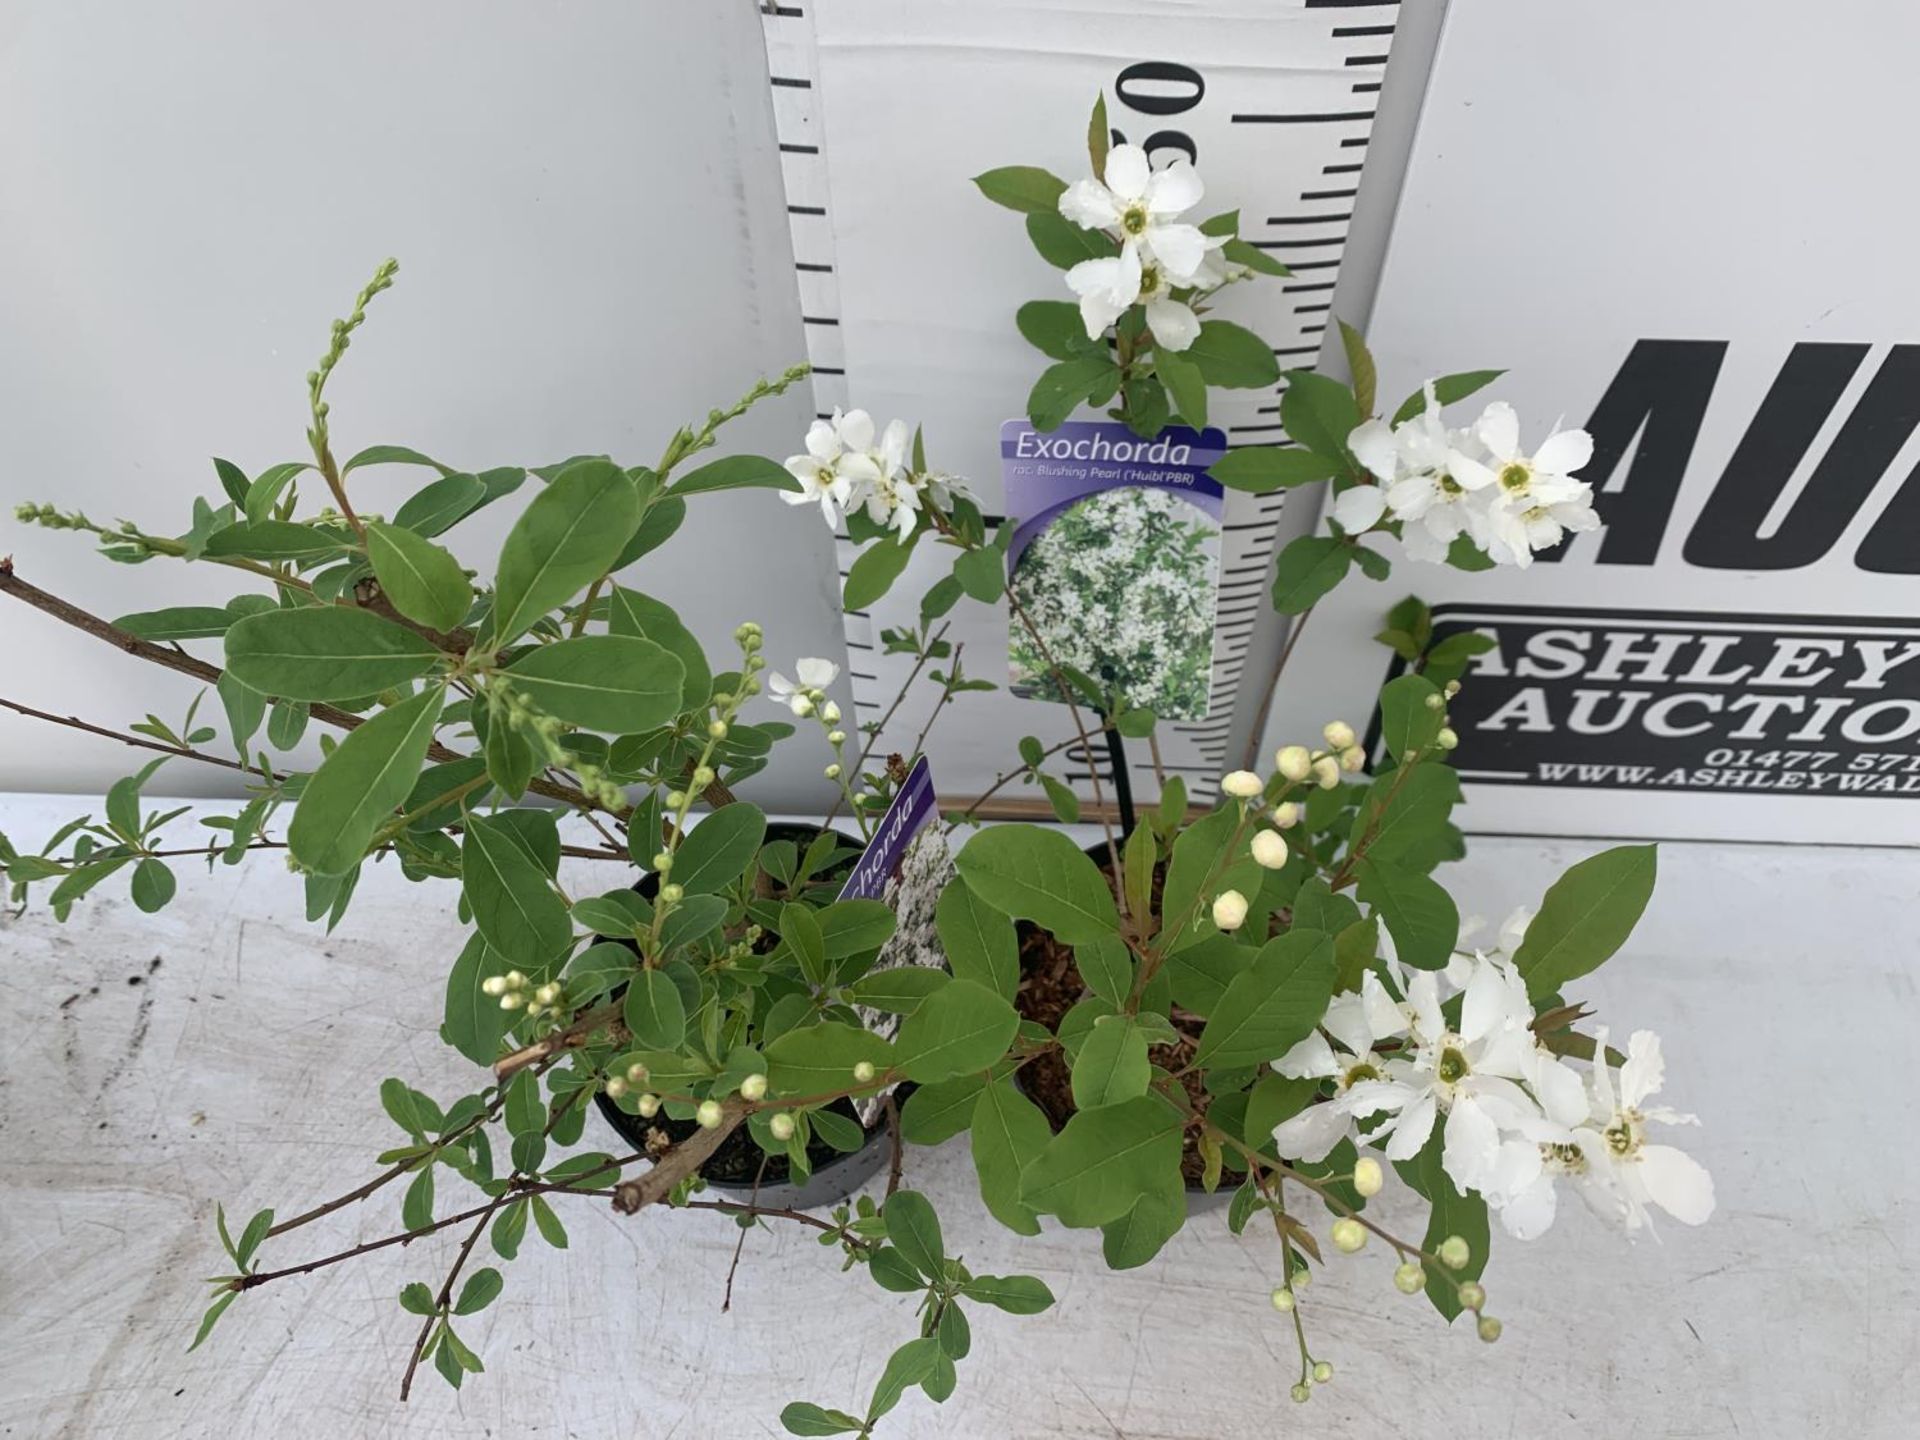 TWO EXOCHORDA 'NIAGARA' AND 'BLUSHING PEARL' APPROX 60CM IN HEIGHT IN 2 LTR POTS PLUS VAT TO BE SOLD - Image 2 of 6